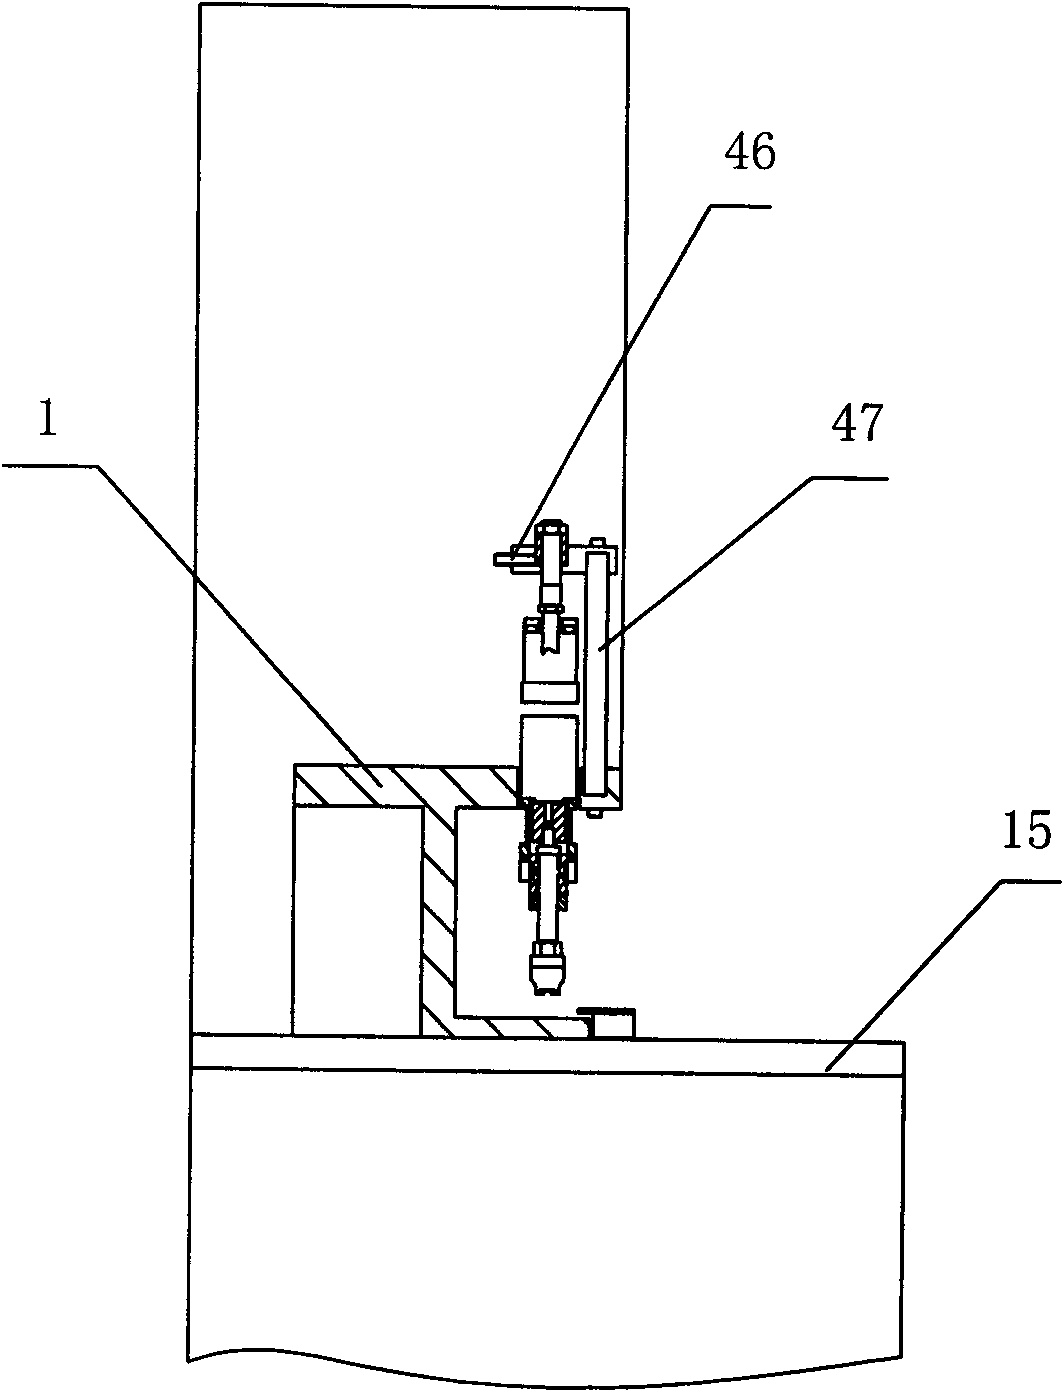 Full-automatic bearing greasing and capping machine